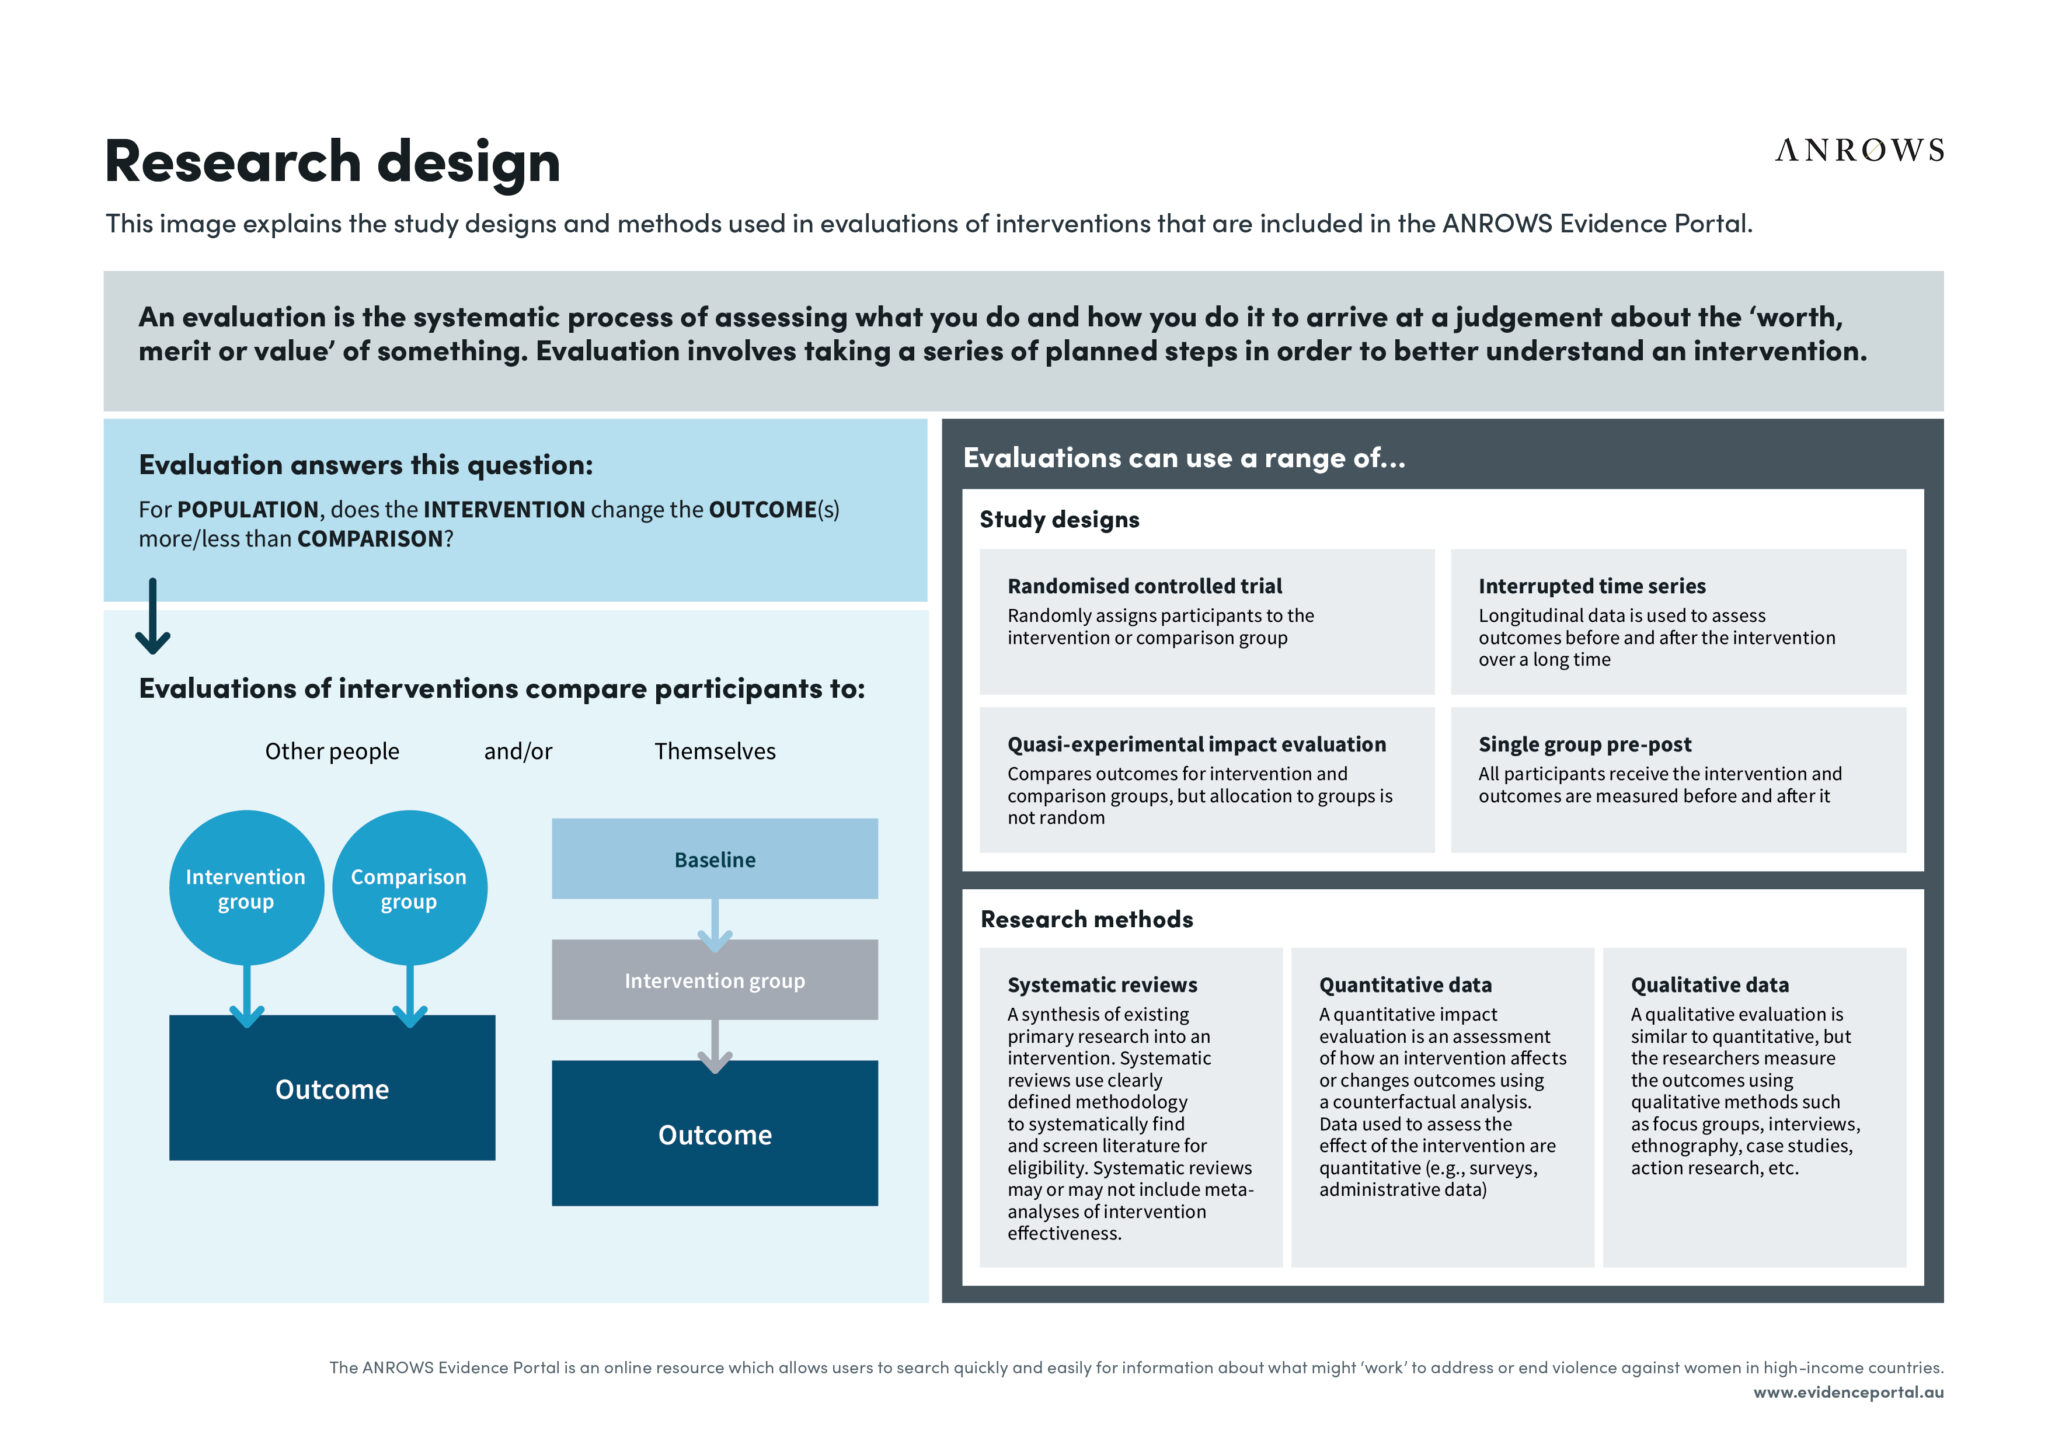 Infographic explains the study designs and methods used in evaluations of interventions within the Evidence Portal. A detailed description can be found on the web page.